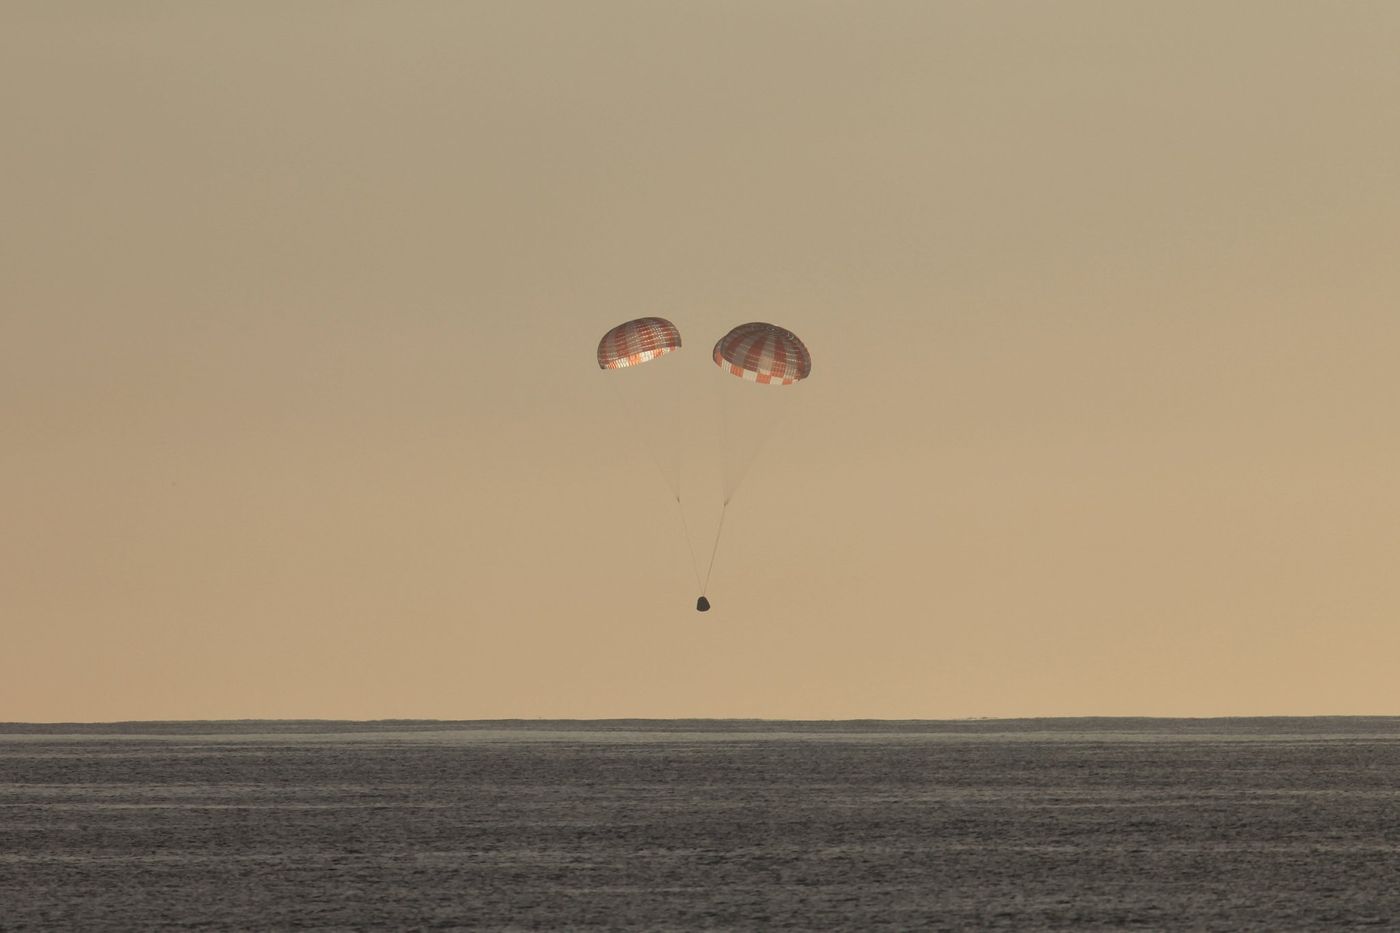 SpaceX Dragon capsule returns to Earth Sunday after almost a month in space.